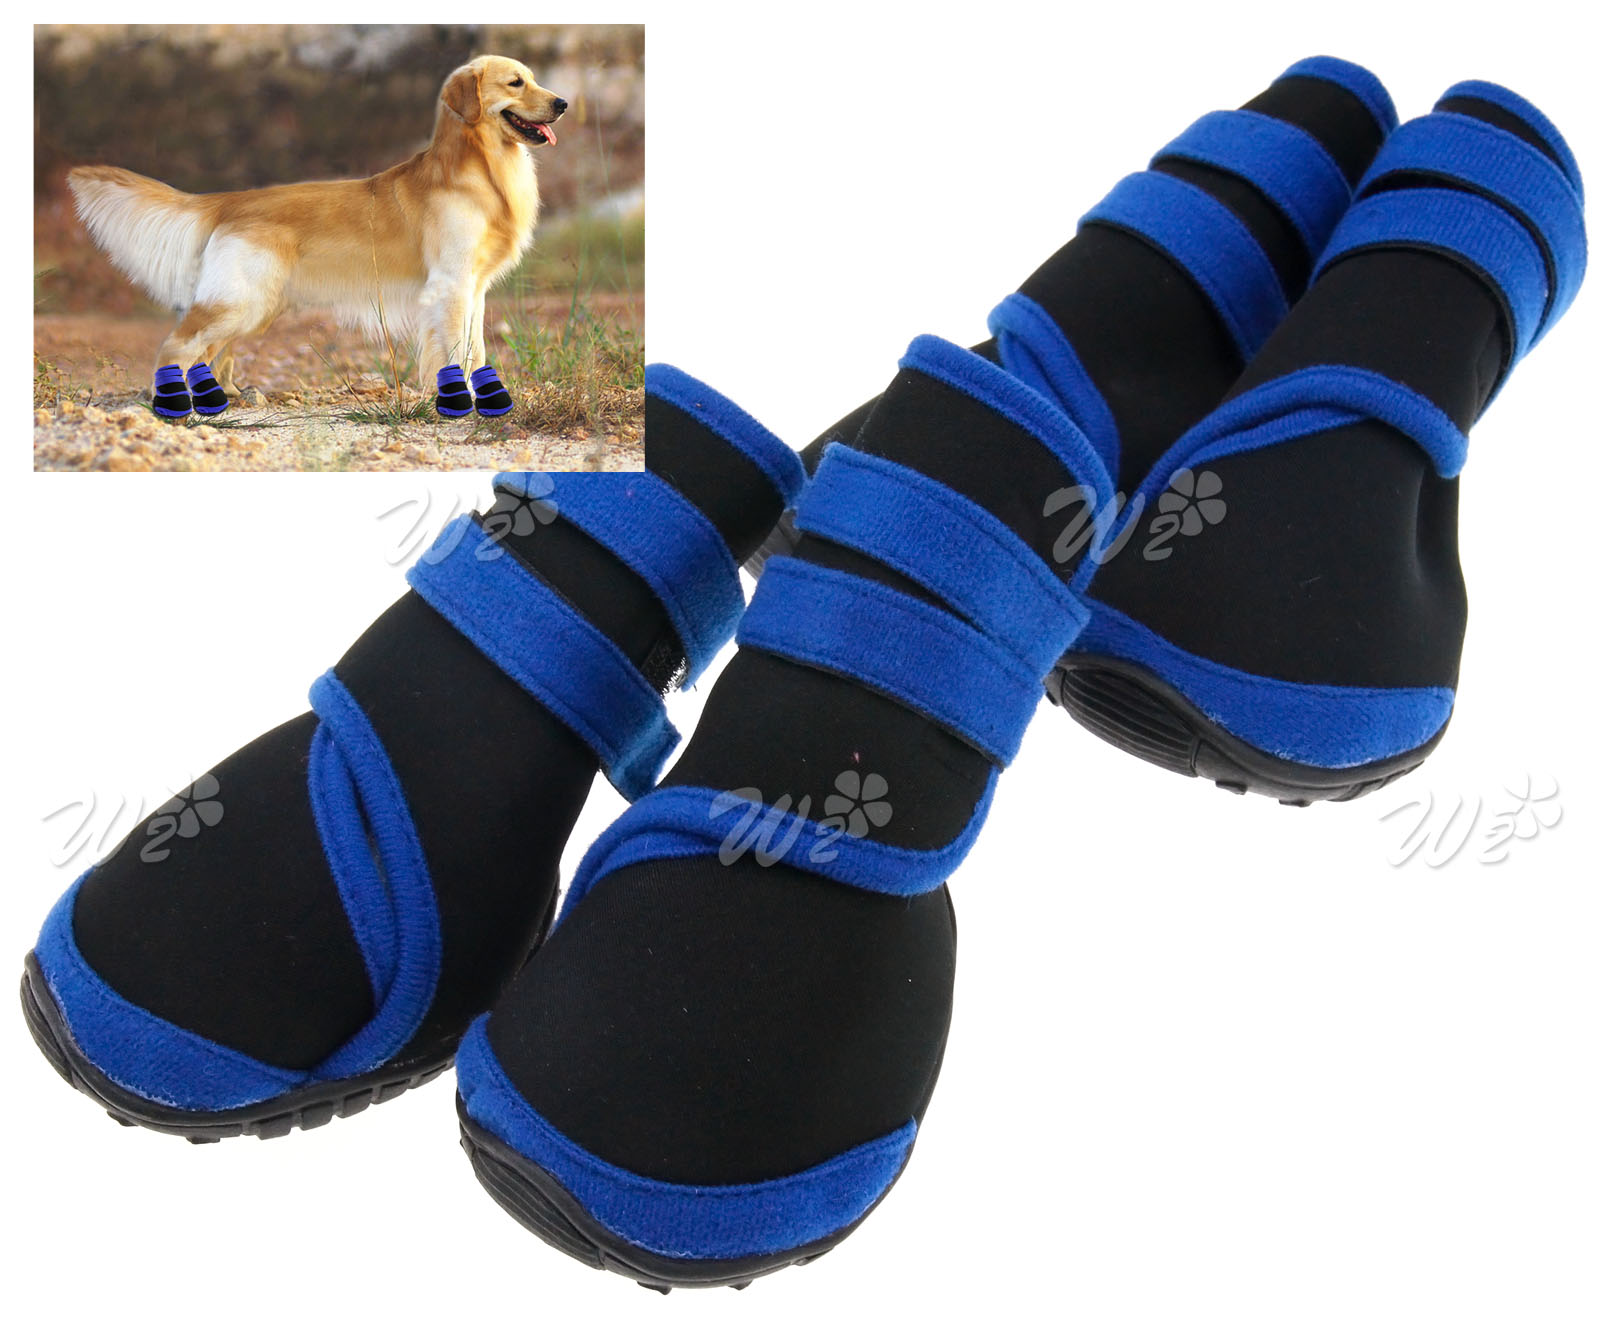 Two Pairs Black M Protective Rain Boots Waterproof Pet Dog Shoes eBay